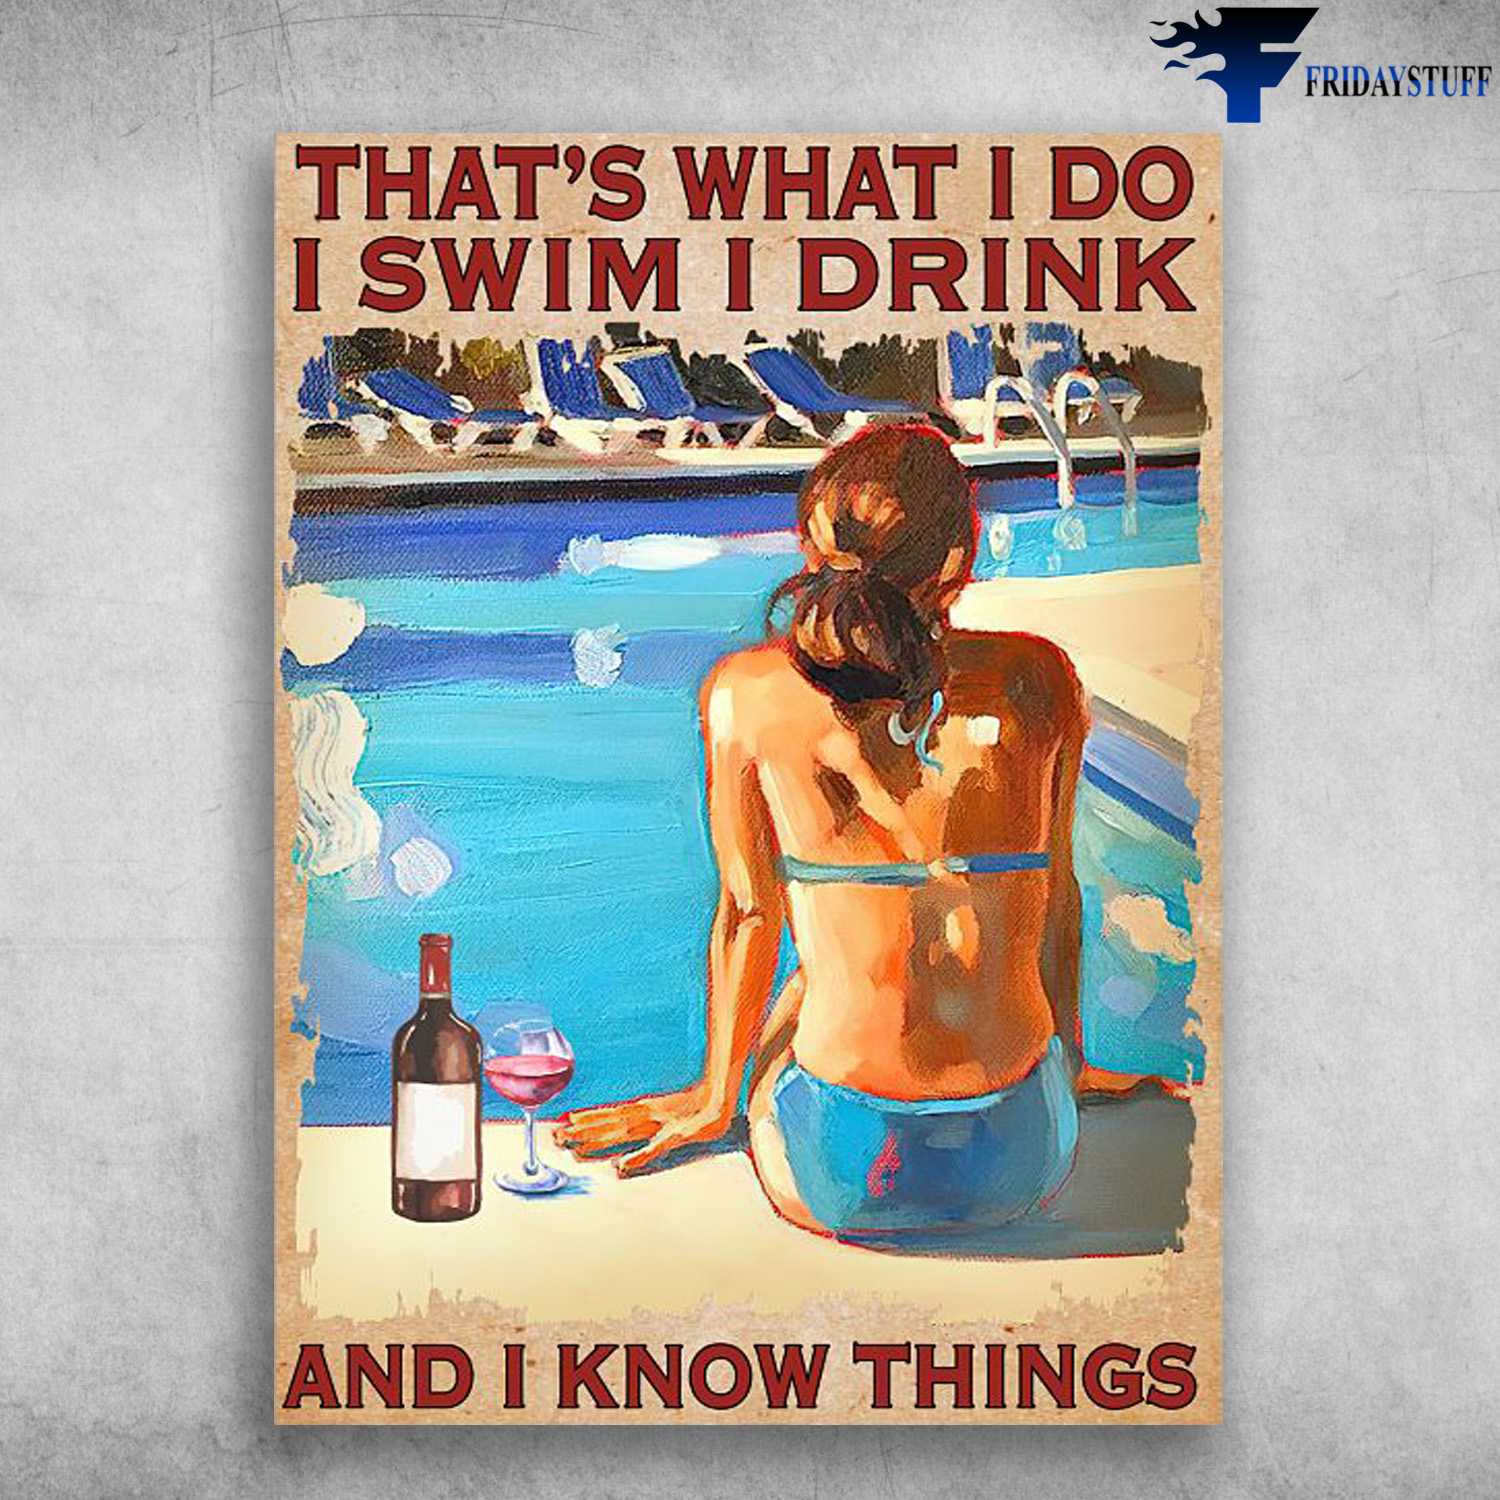 Swimming Pool Poster, Swimming With Wine, That's What I Do, I Swim, I Drink, And I Know Things